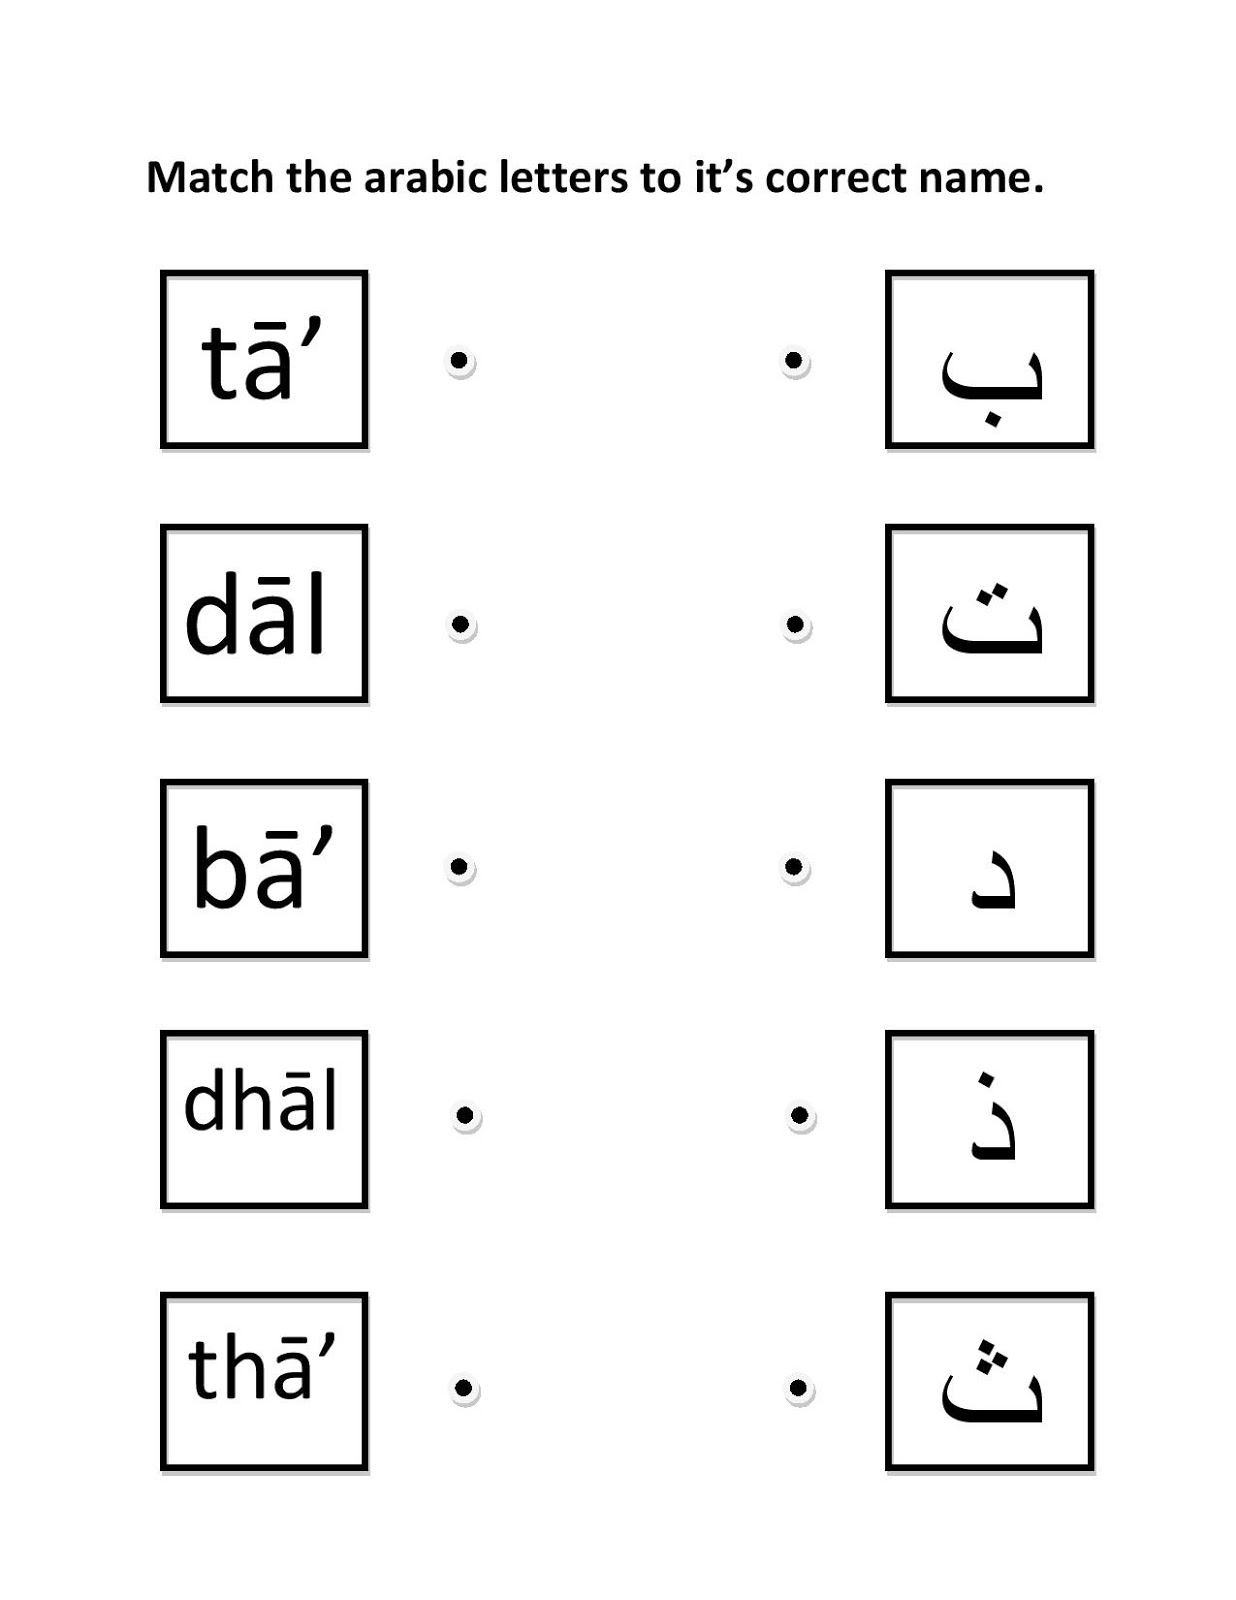 14-best-images-of-arabic-worksheets-matching-arabic-worksheets-for